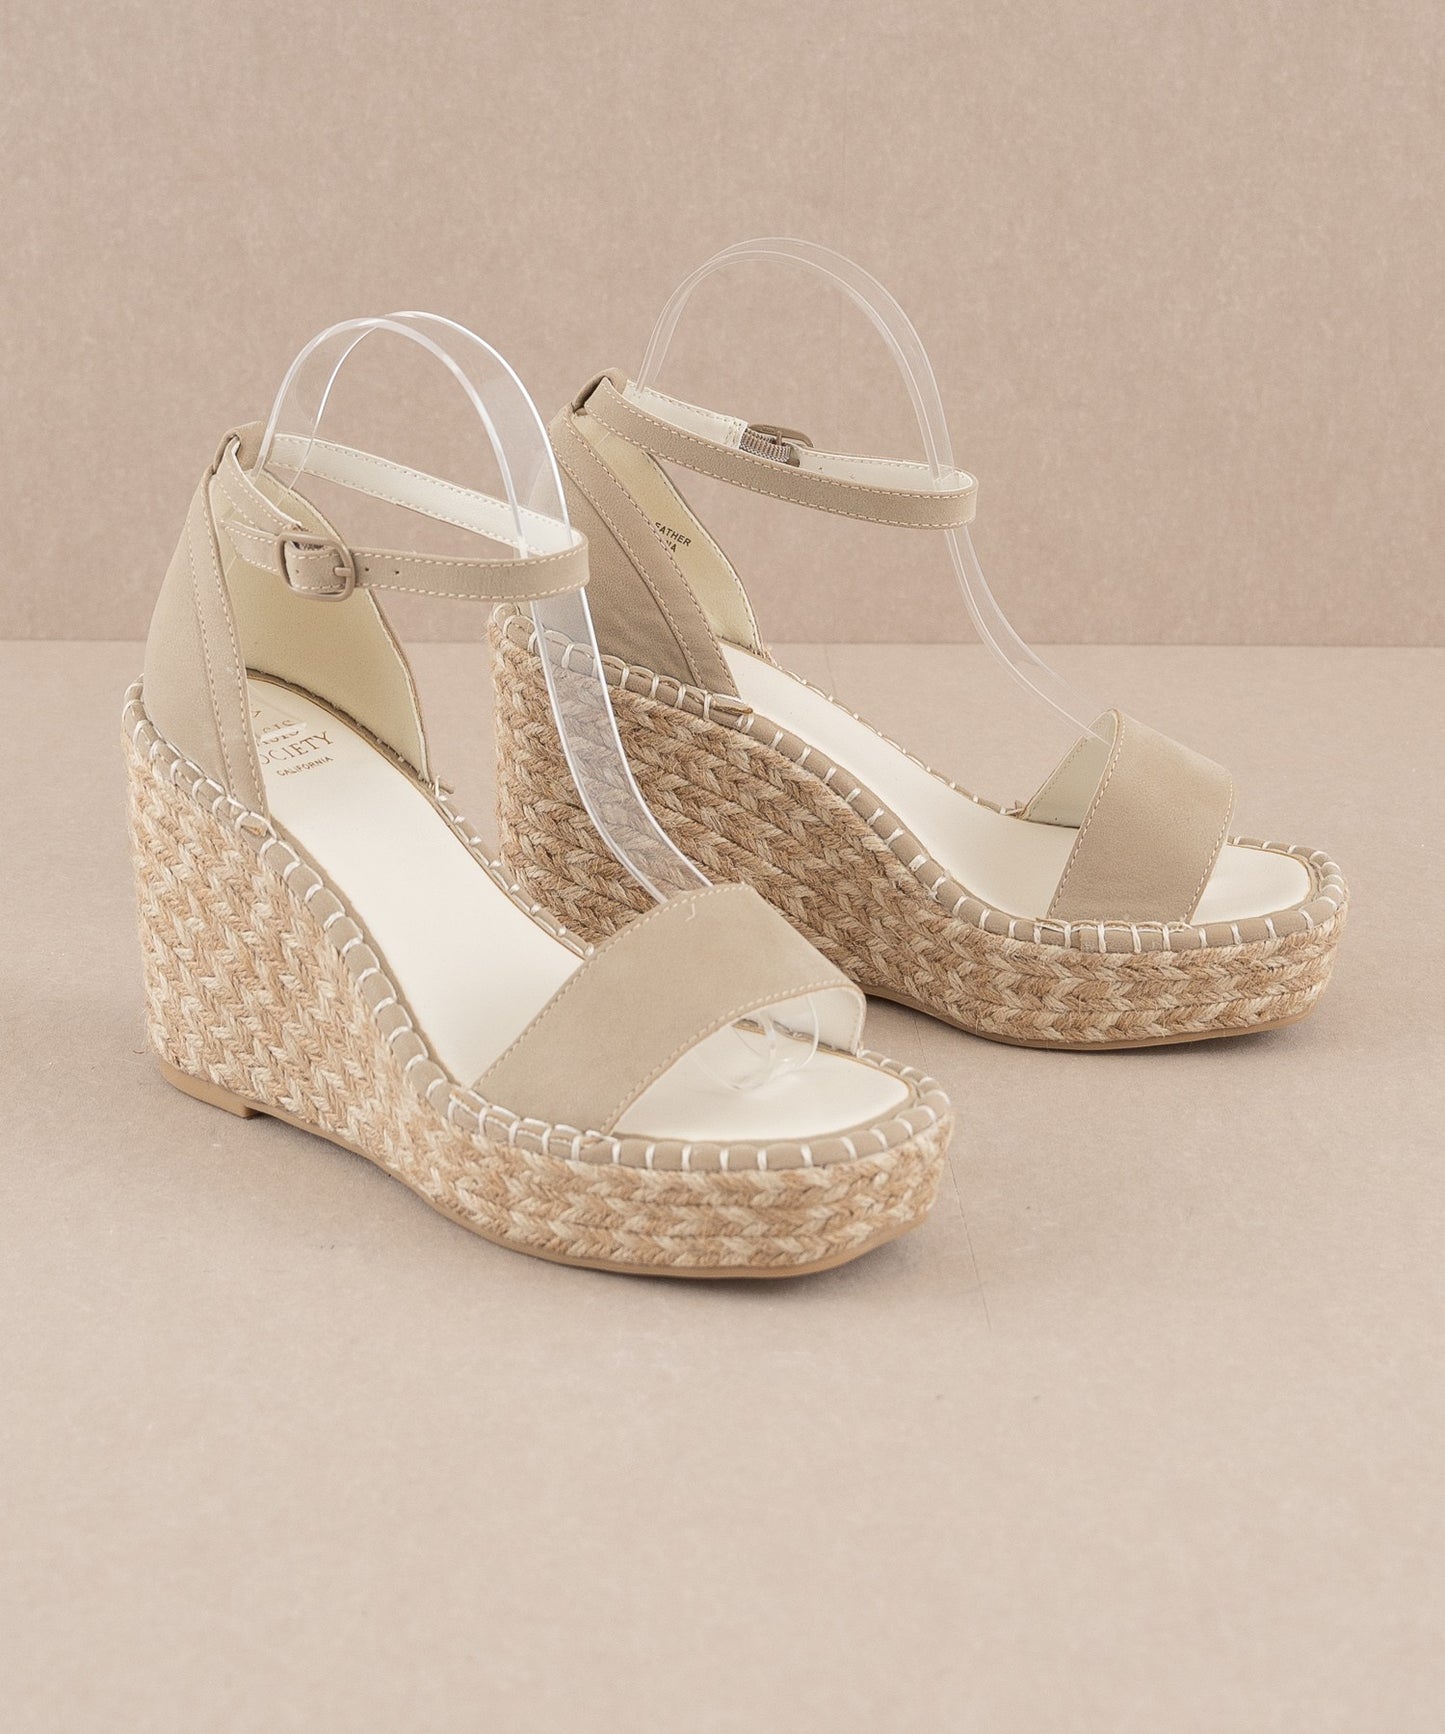 The Lily Wedges